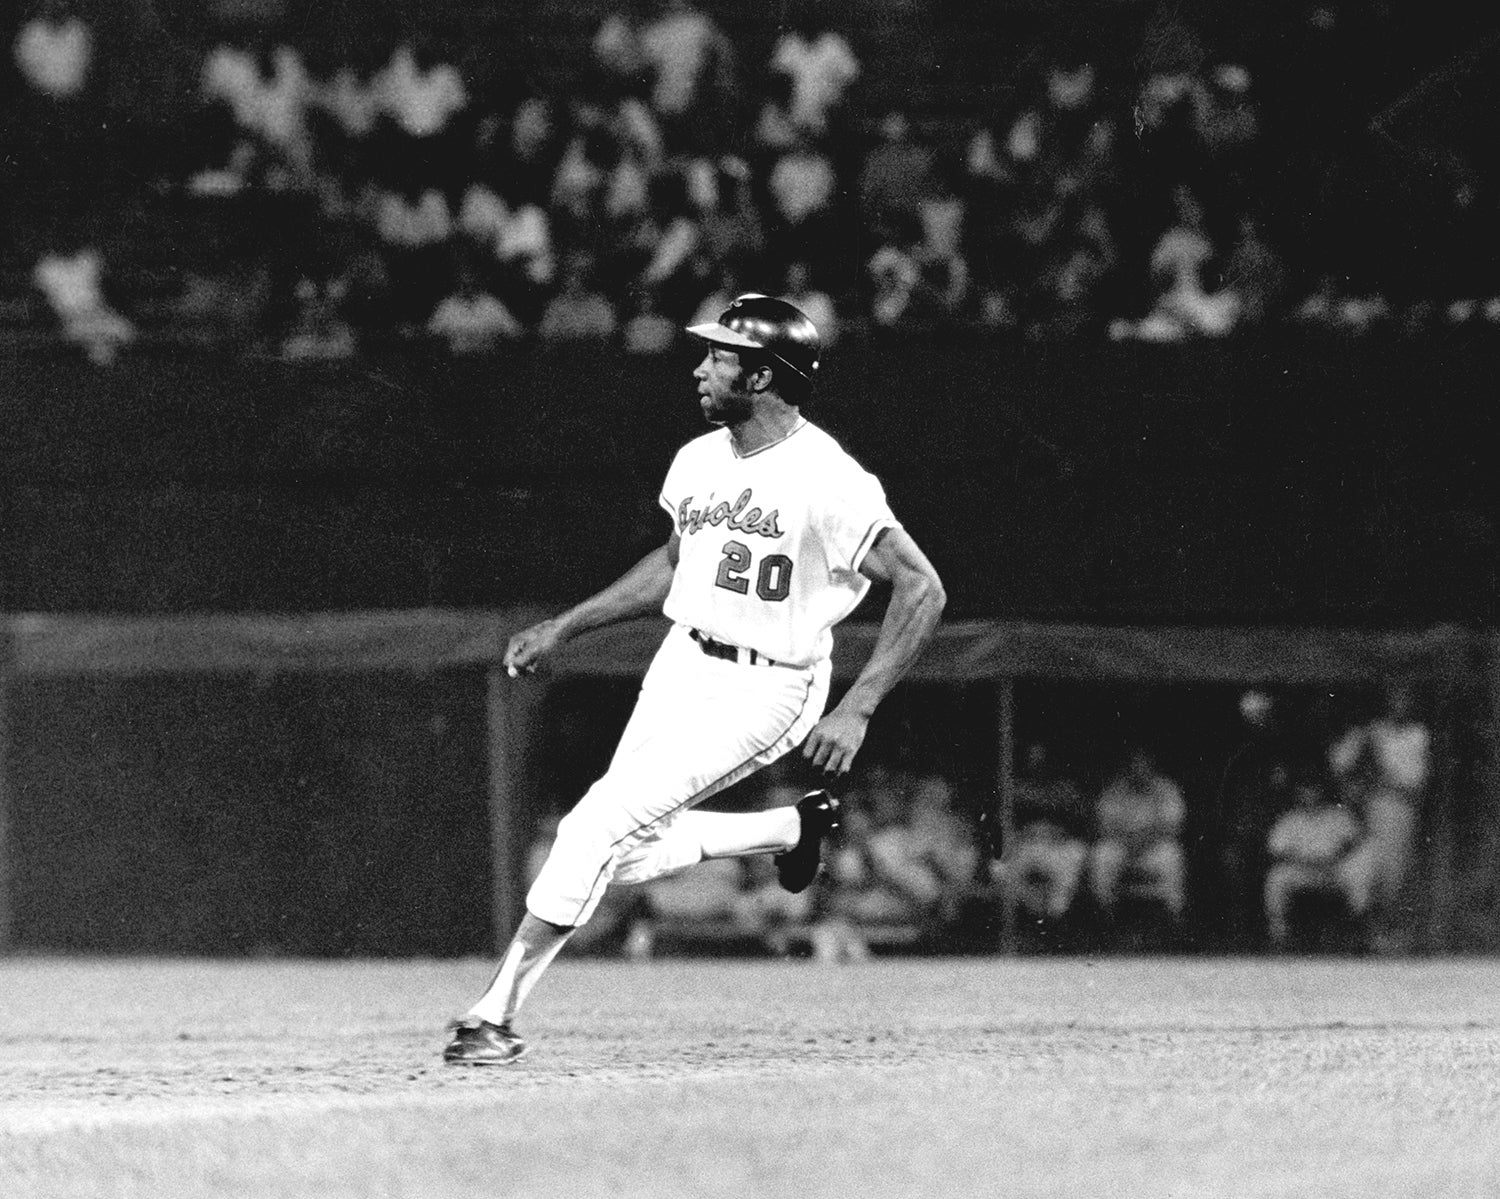 Frank Robinson, Biography & Facts